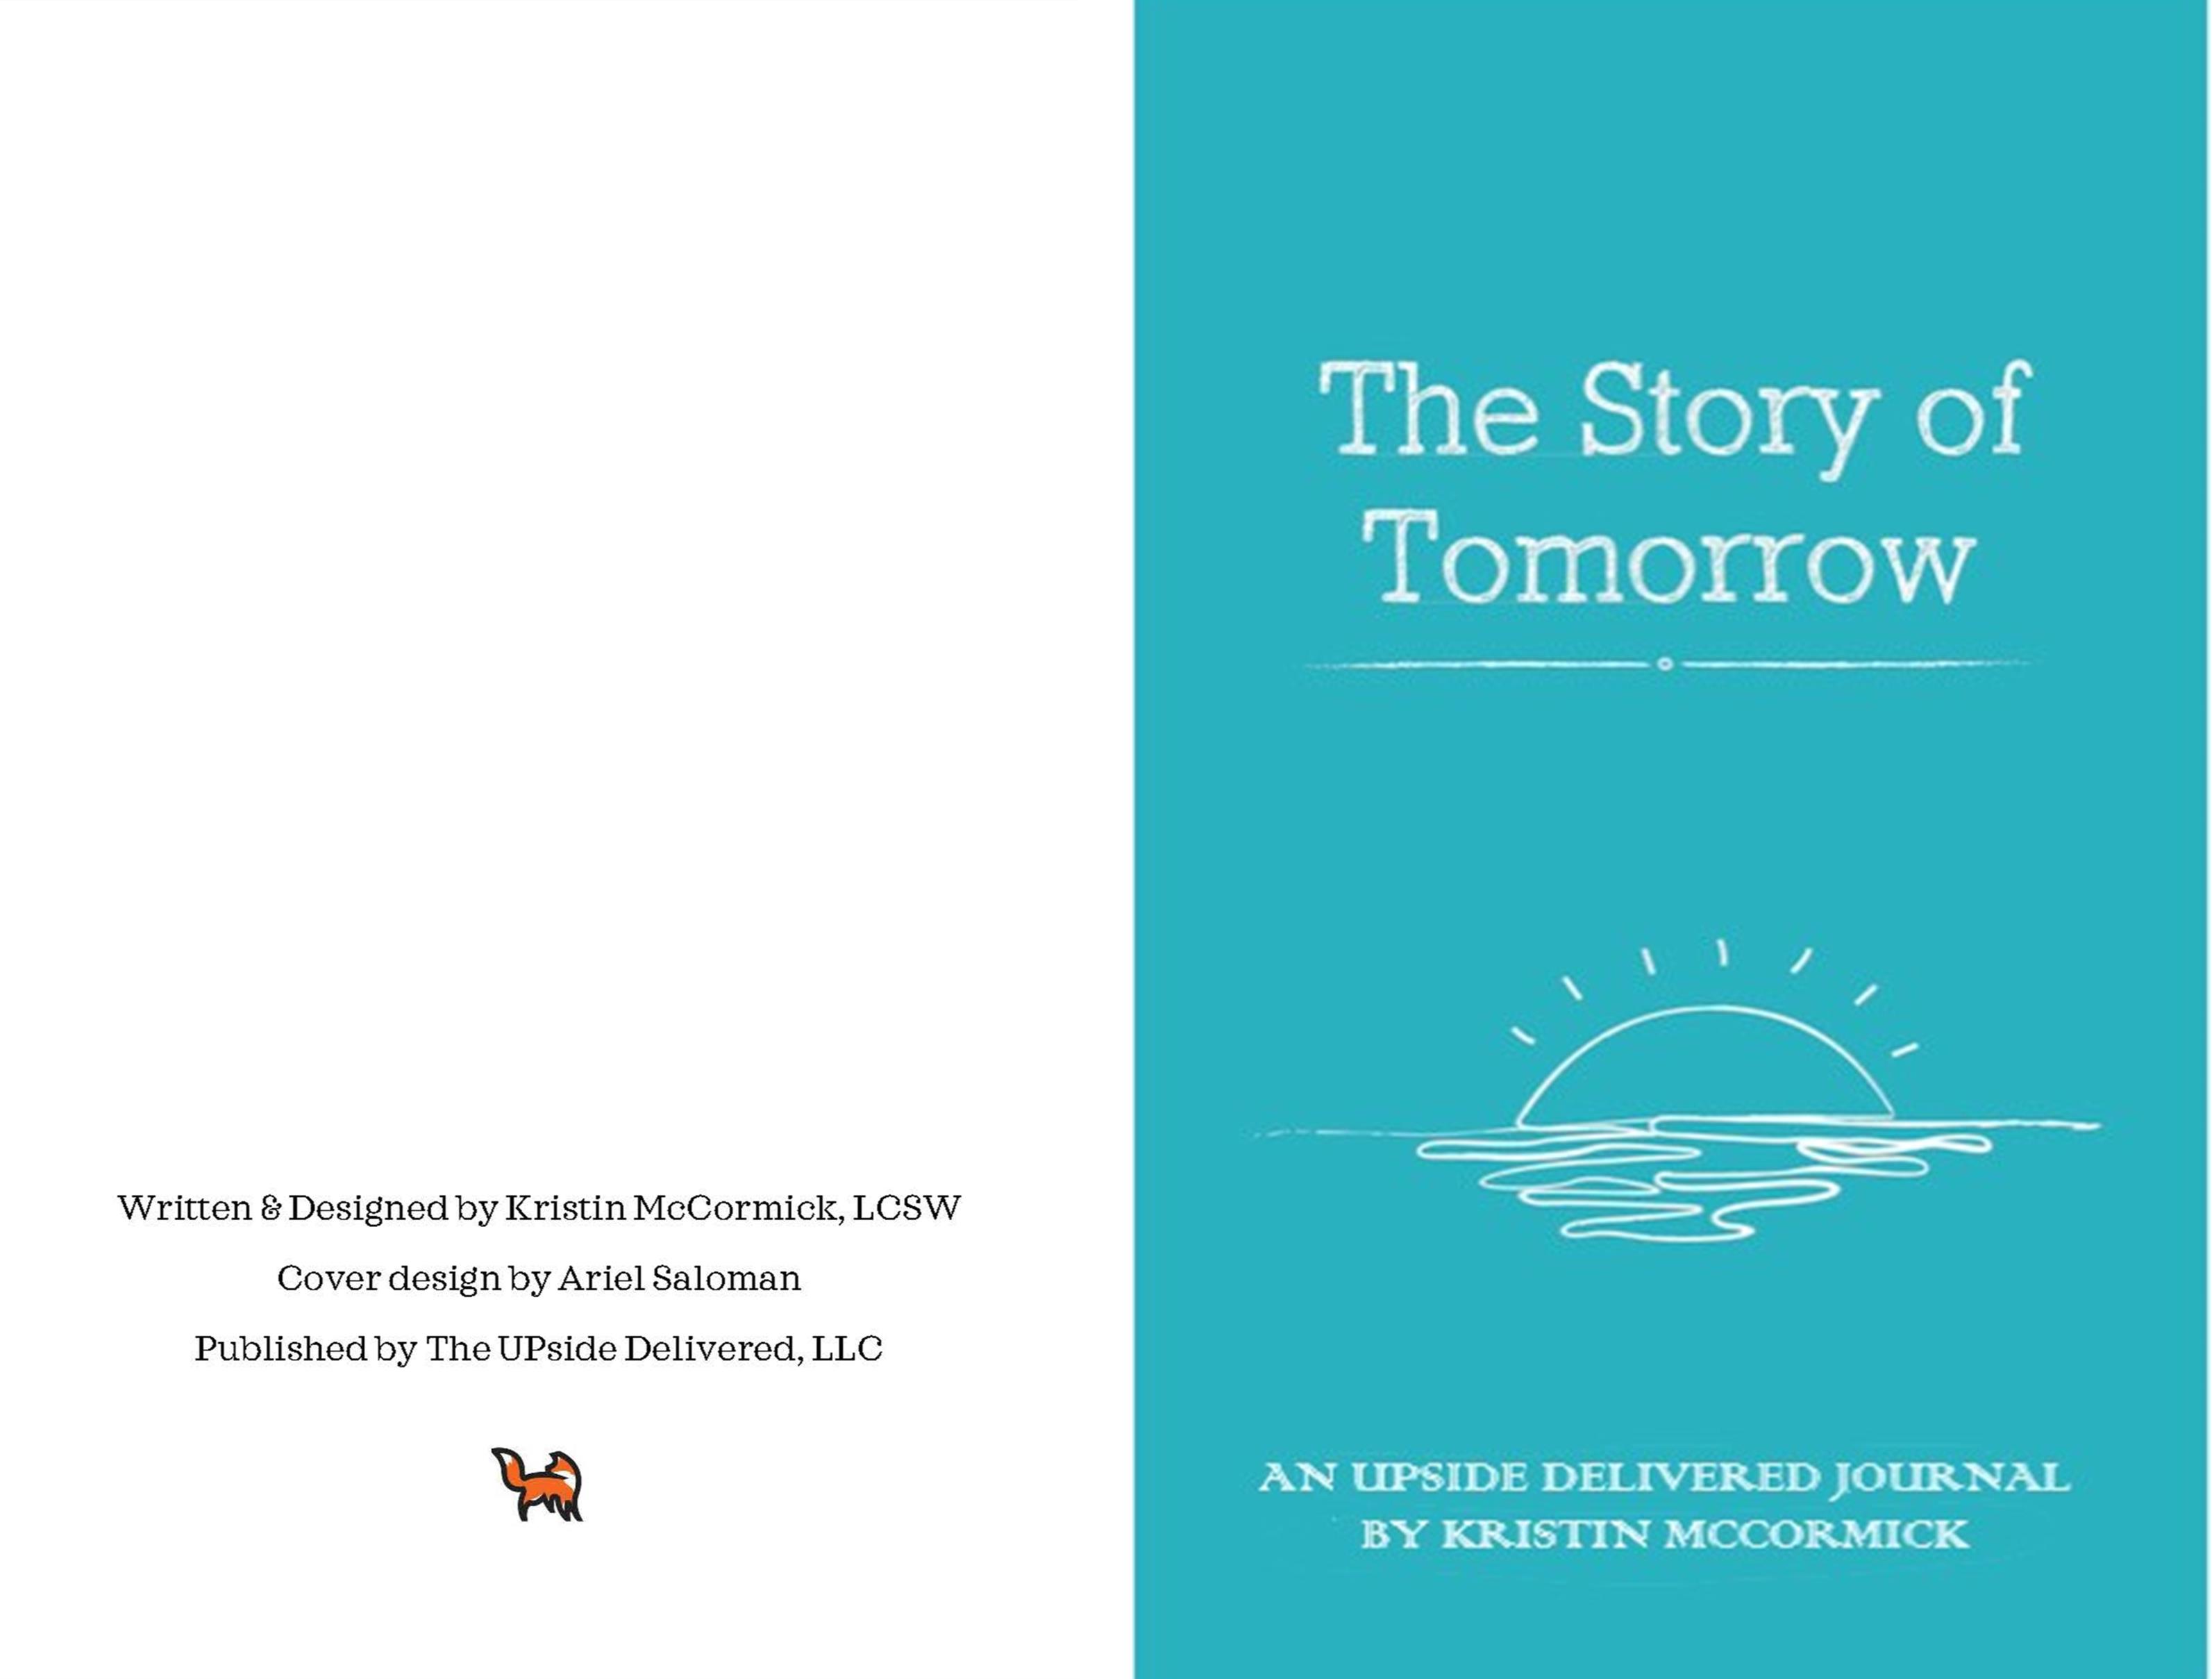 The Story of Tomorrow - School Edition cover image